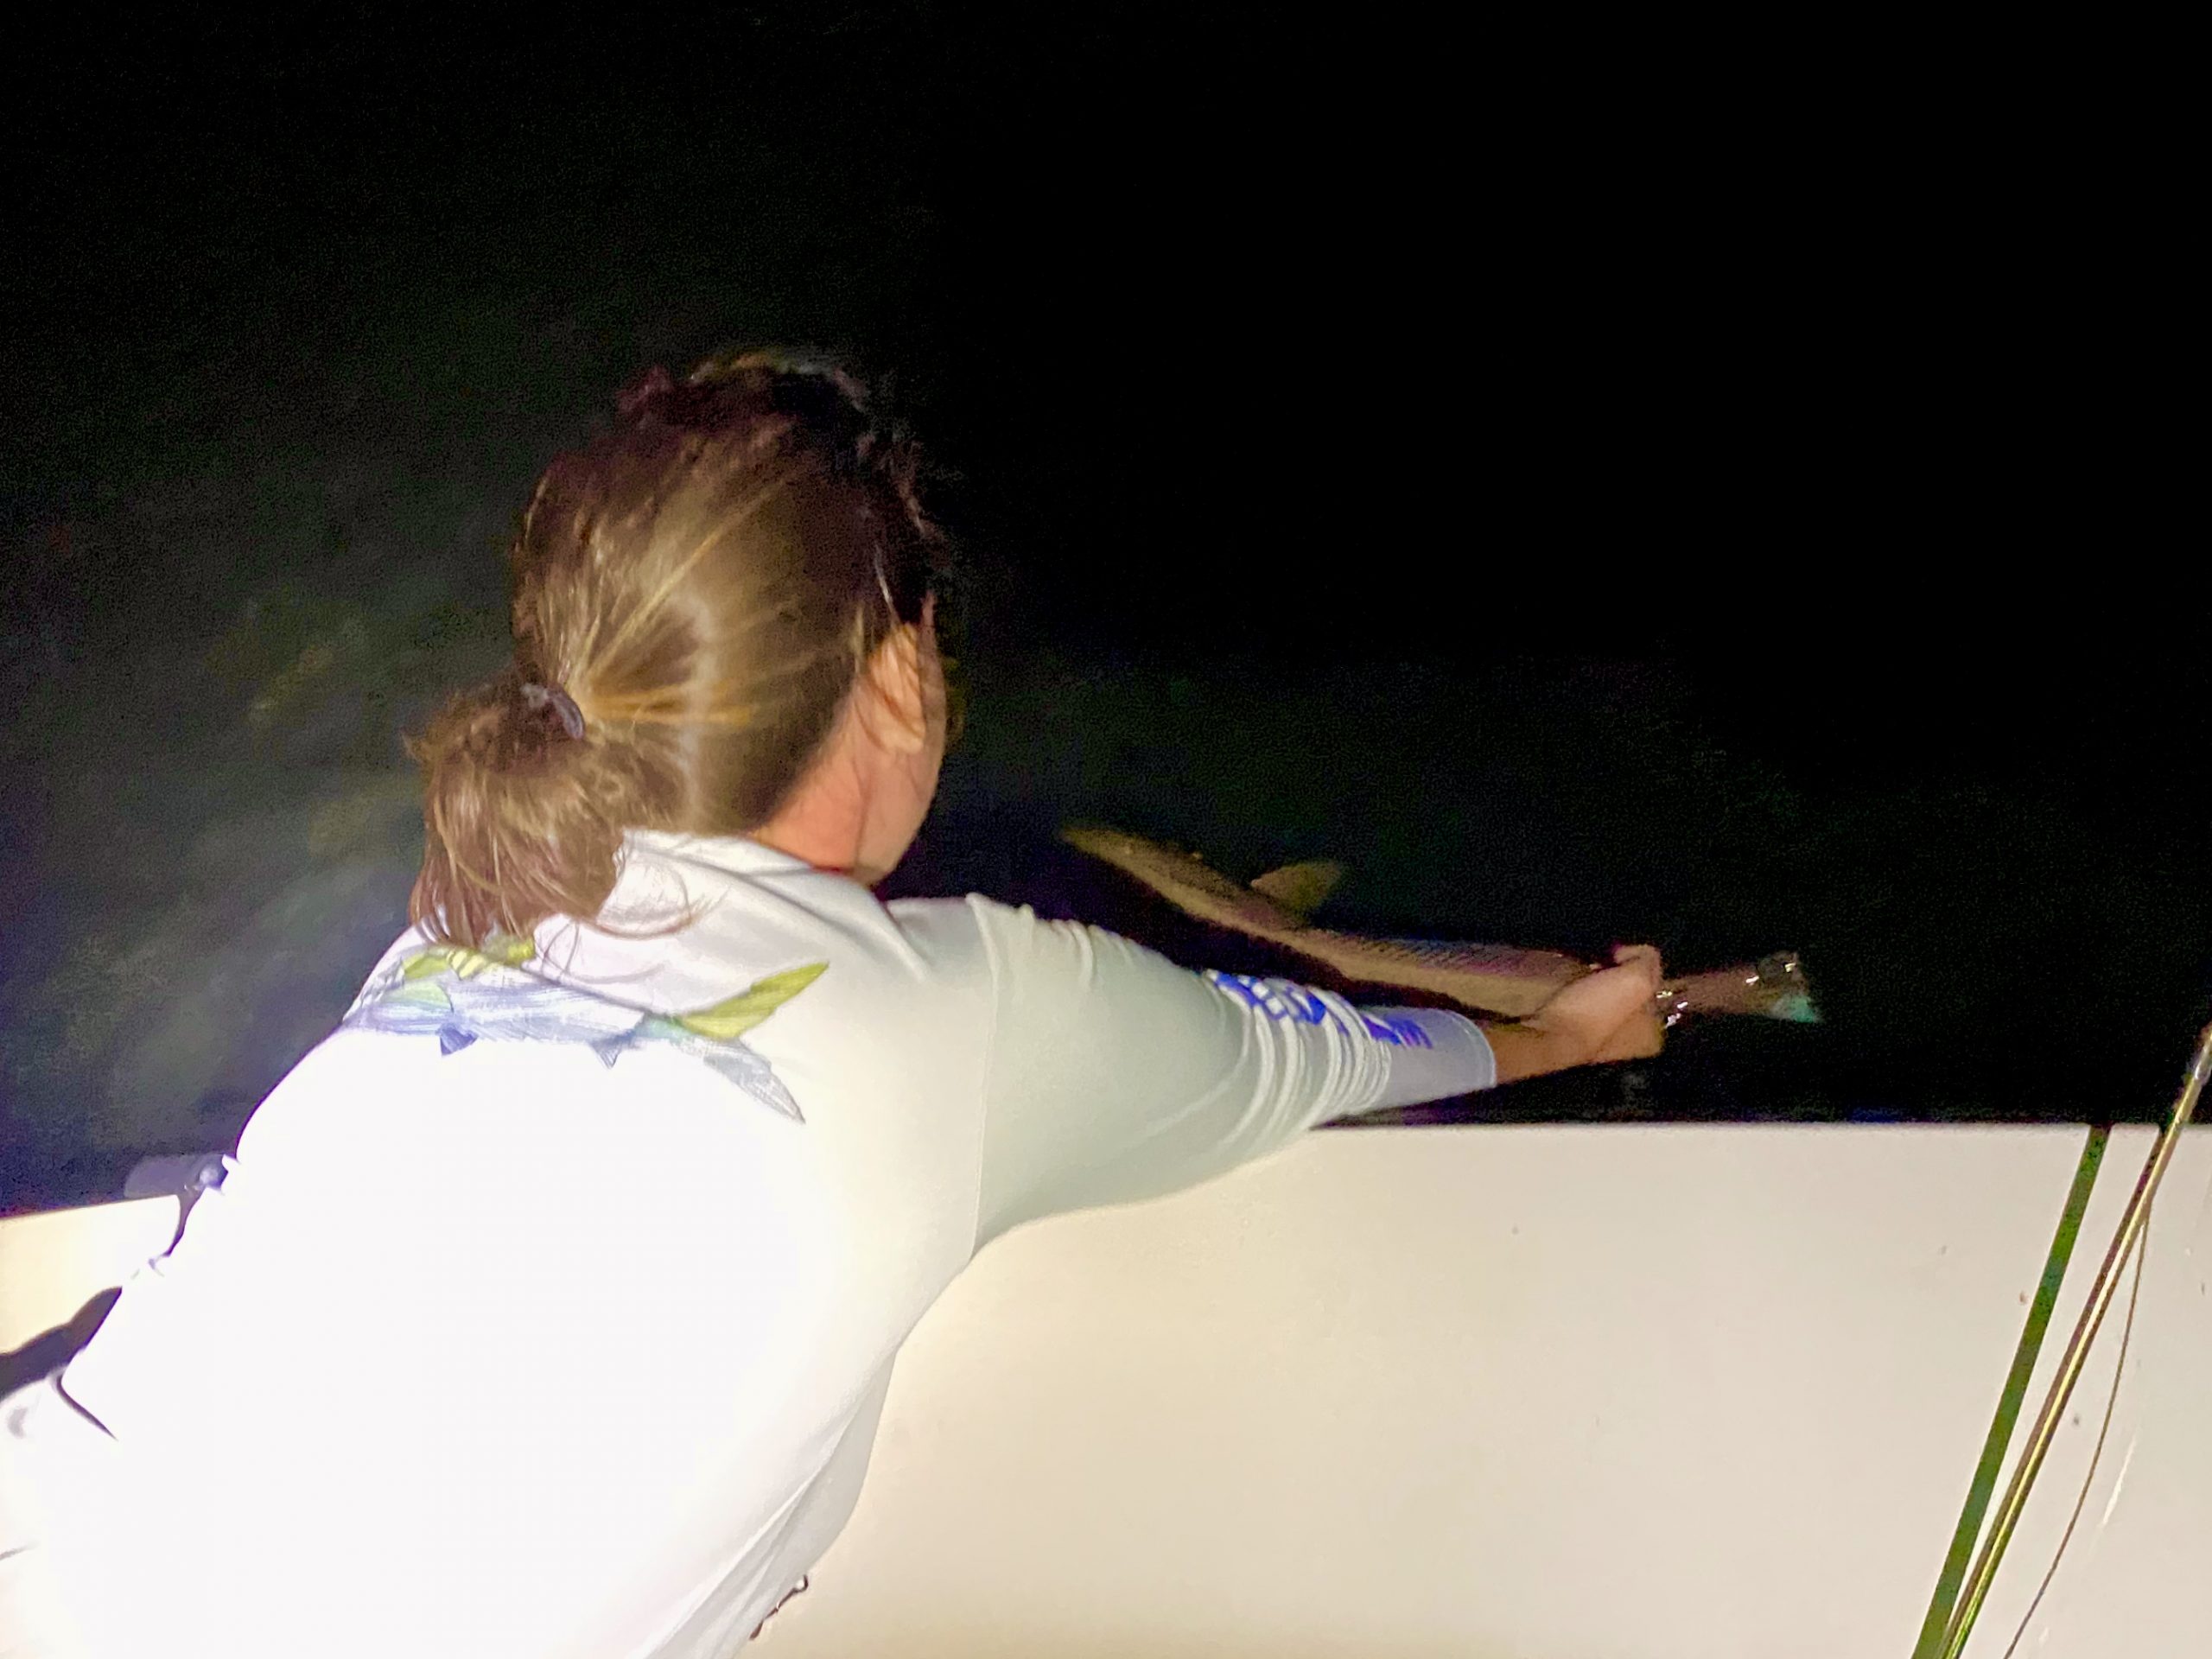 Angler releases a redfish back into the water at night